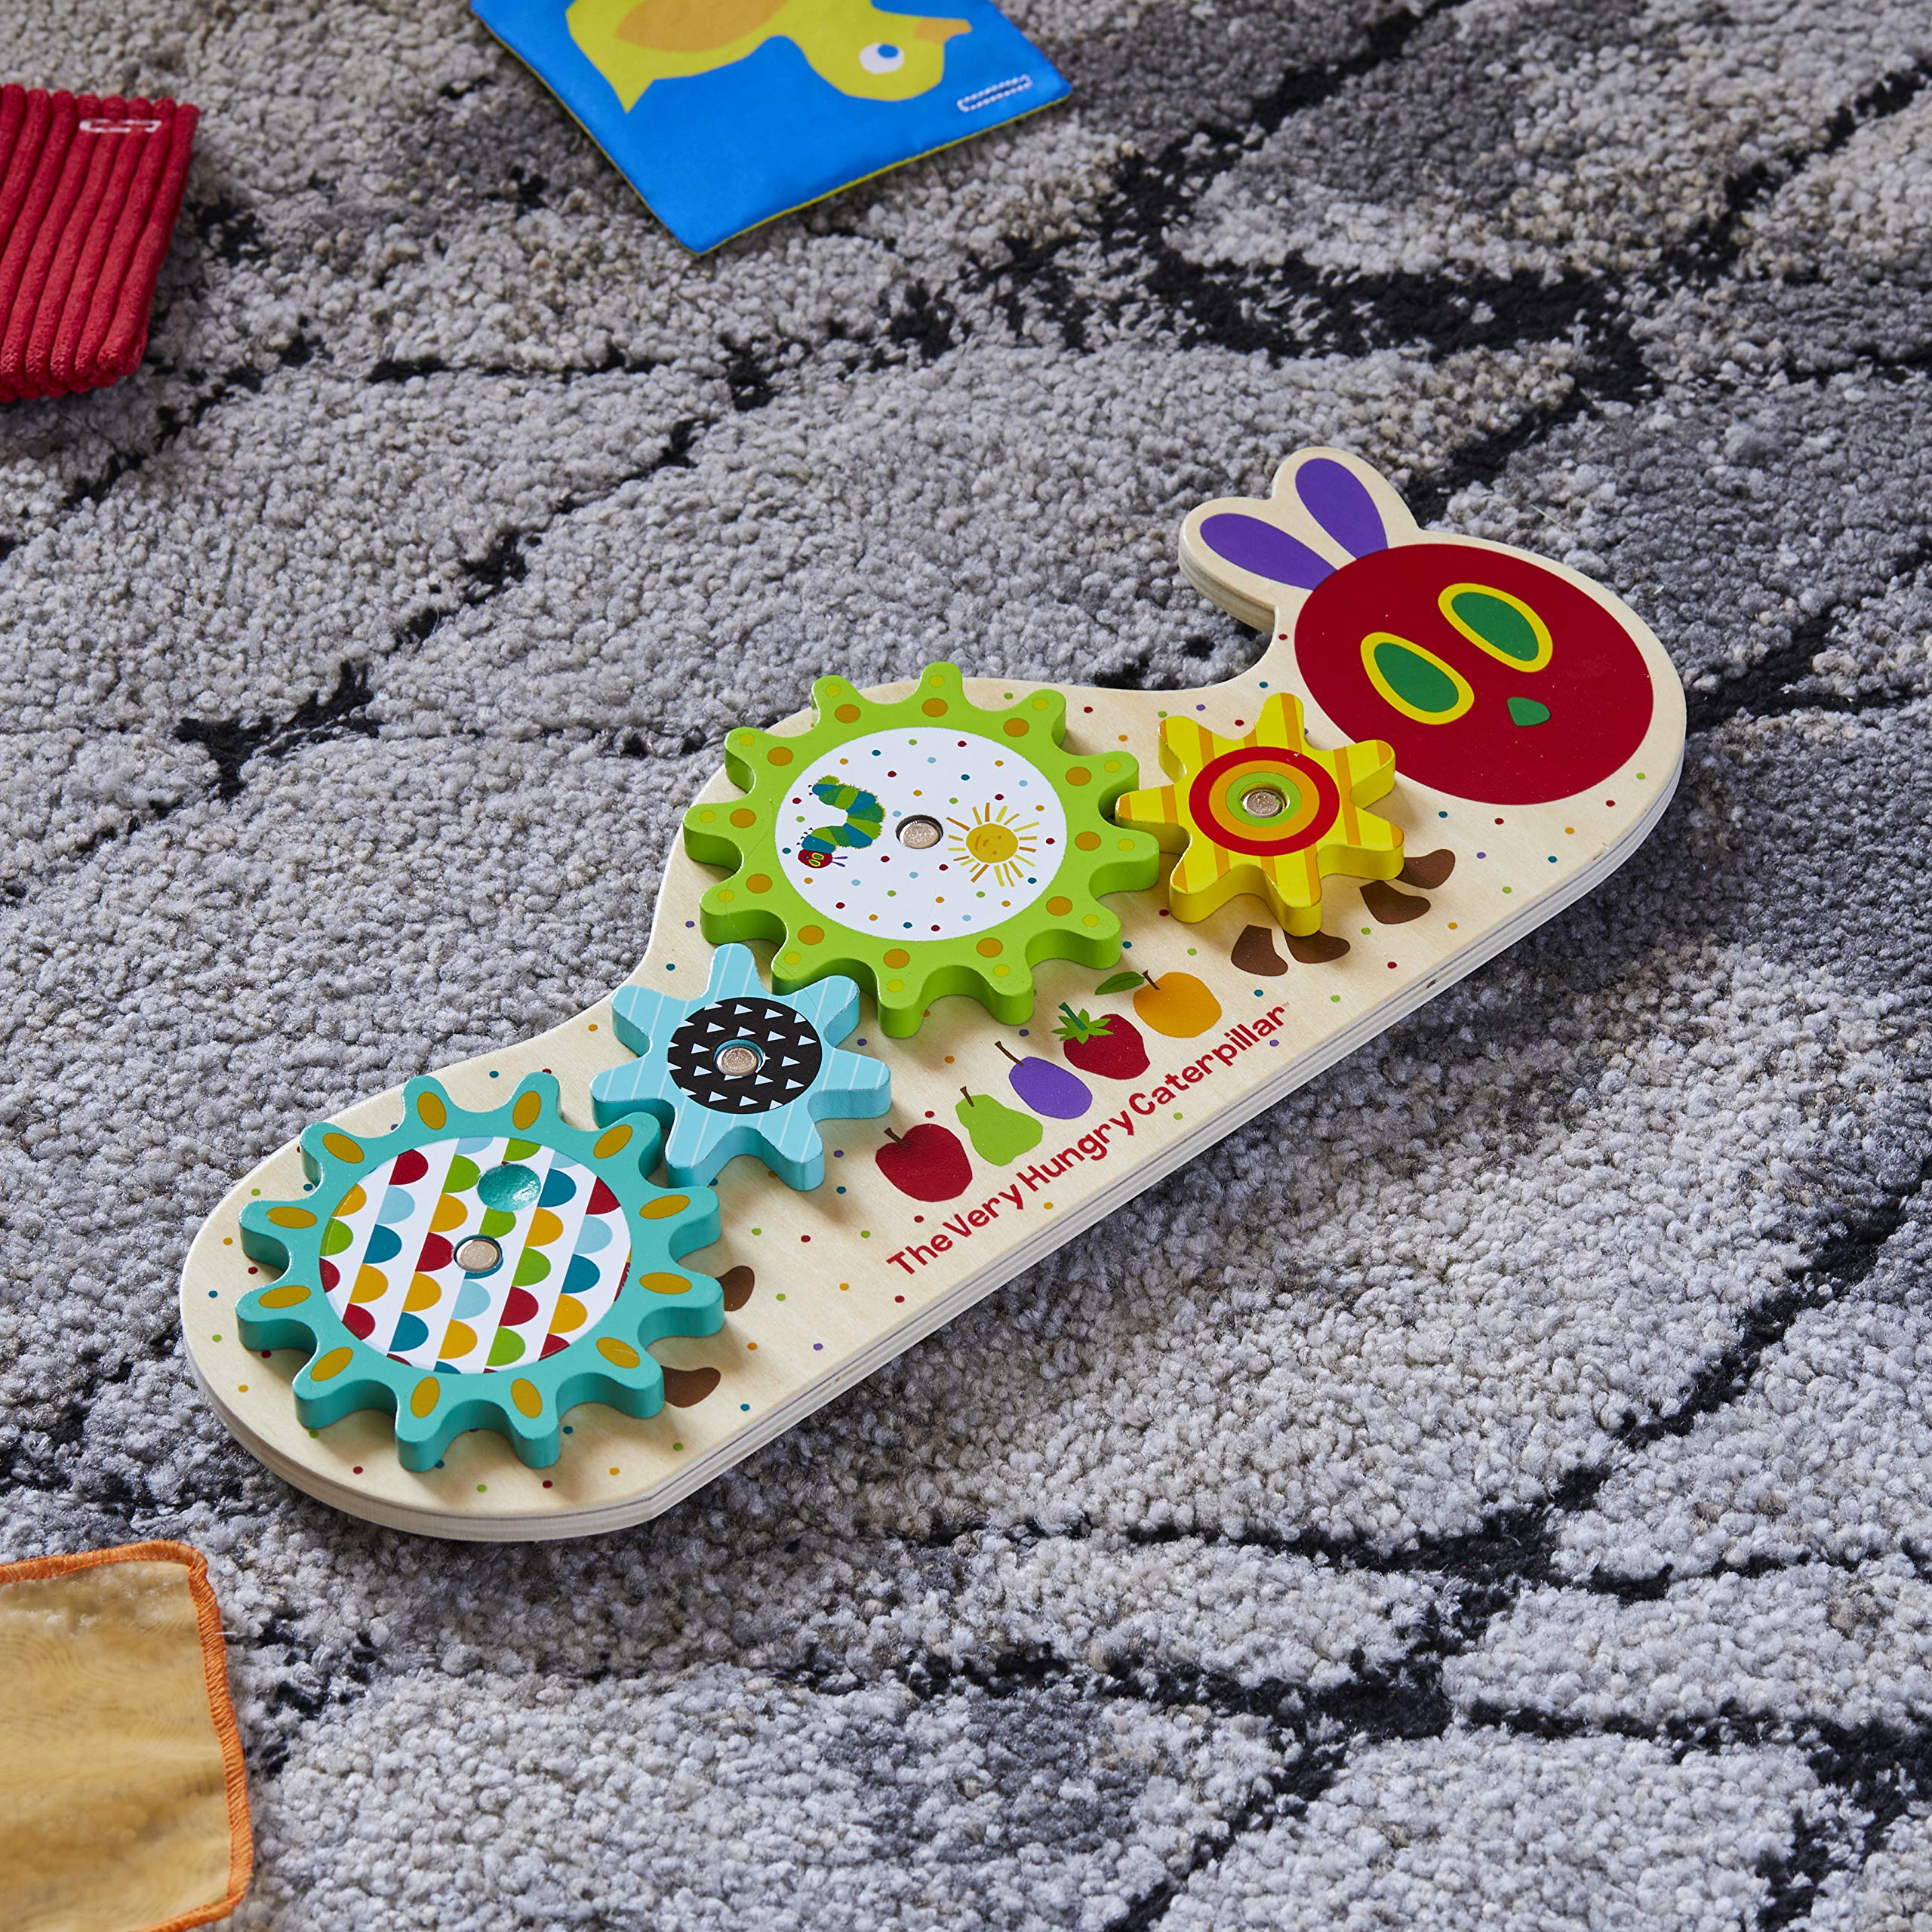 World of Eric Carle Caterpillar Gears Wooden Jigsaw Puzzle for Preschool Kids & Toddlers